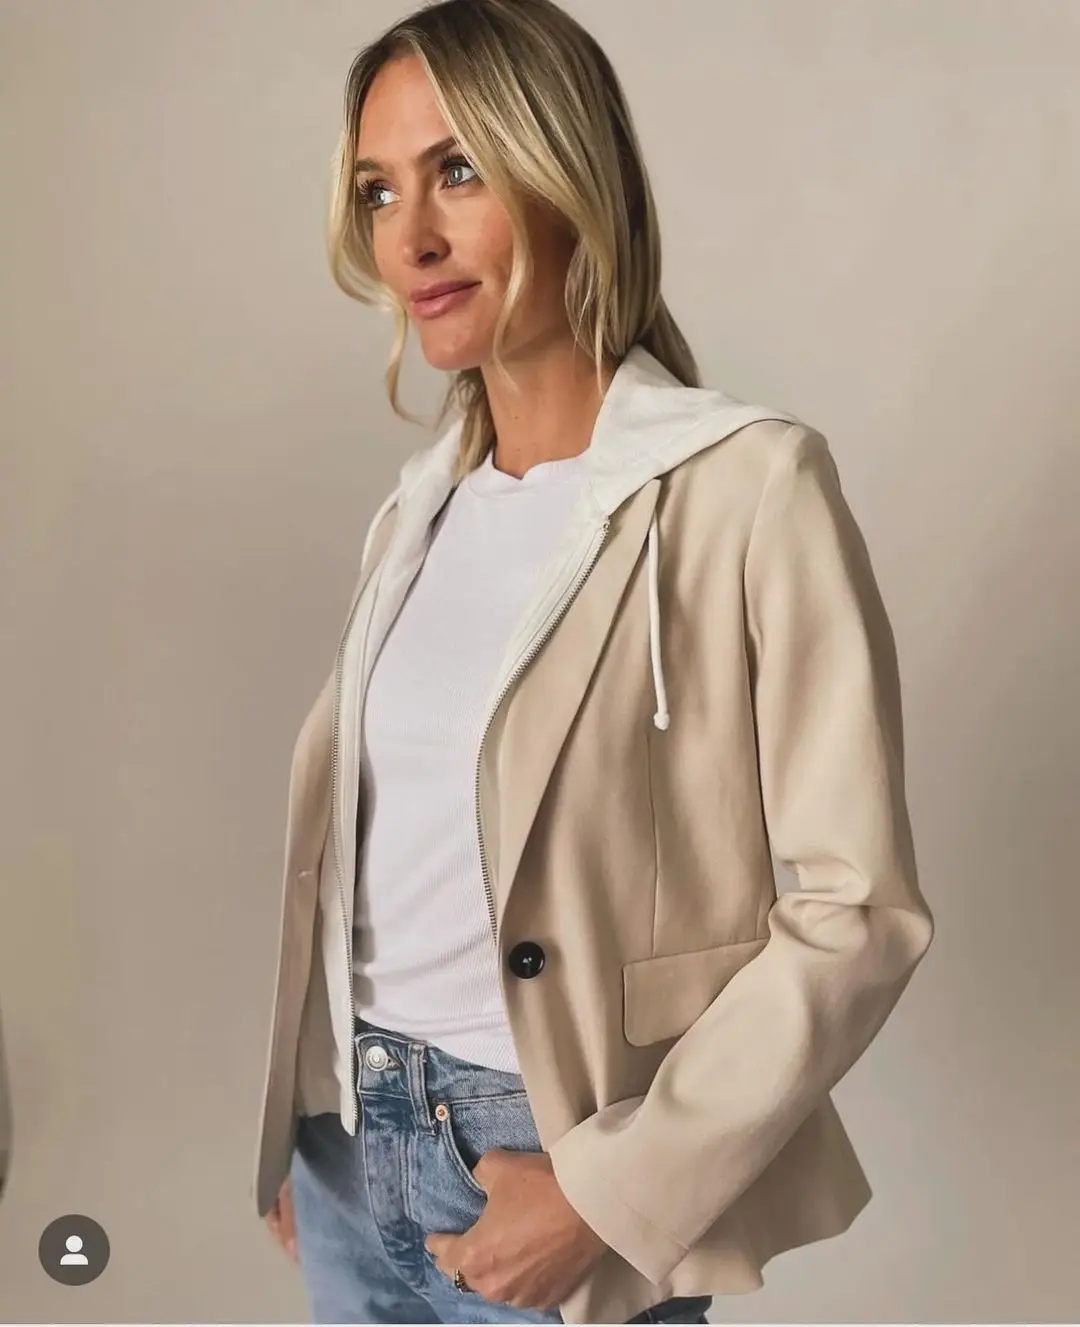 woman wearing athleisure work outfits, with jeans, gym white shirt and a sports jacket